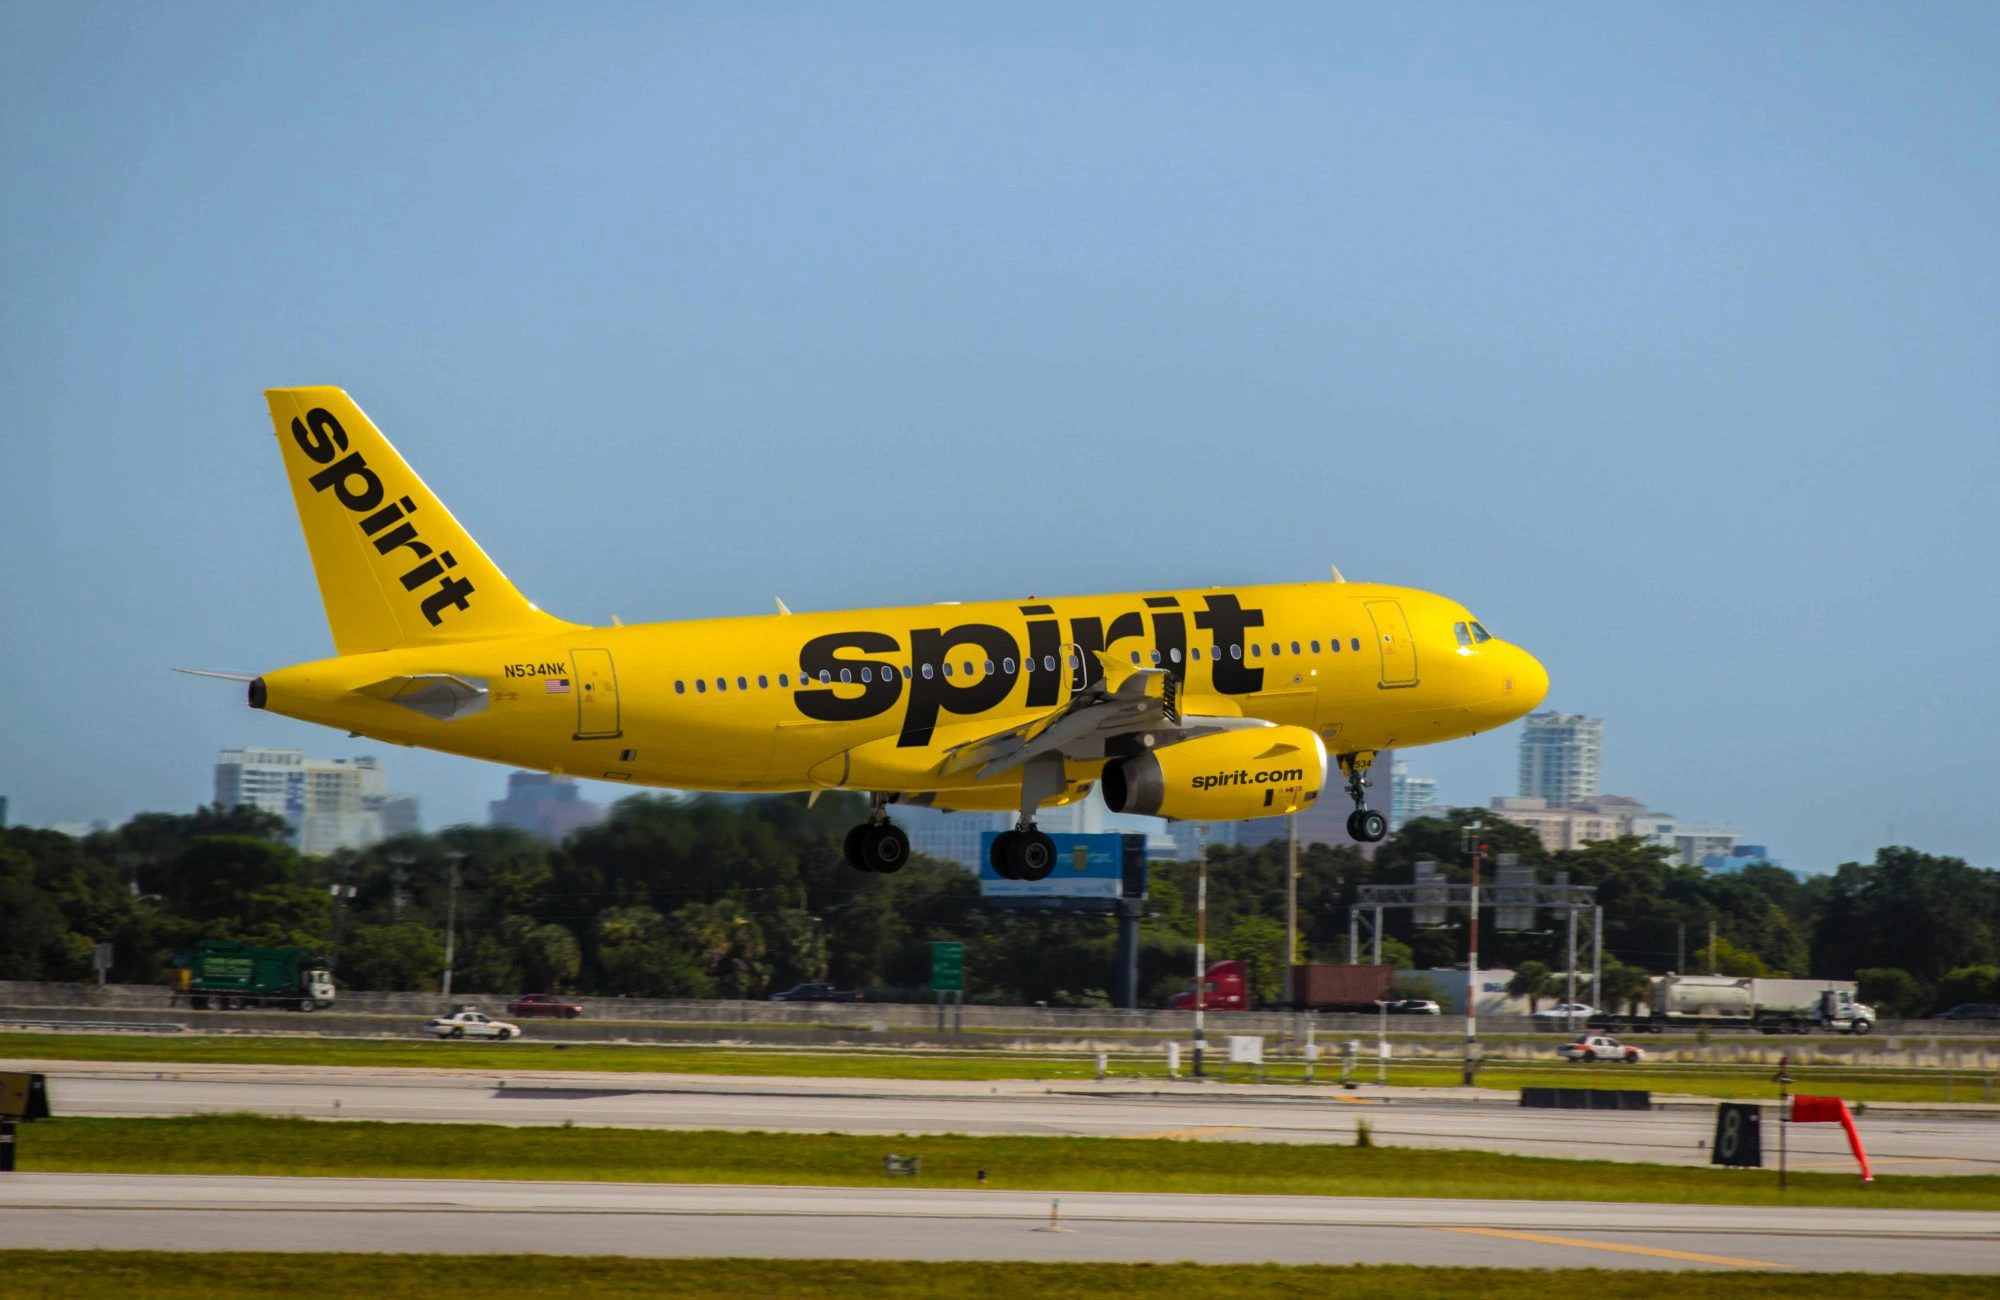 How to contact Spirit Airlines from Bogotá,Colombia?